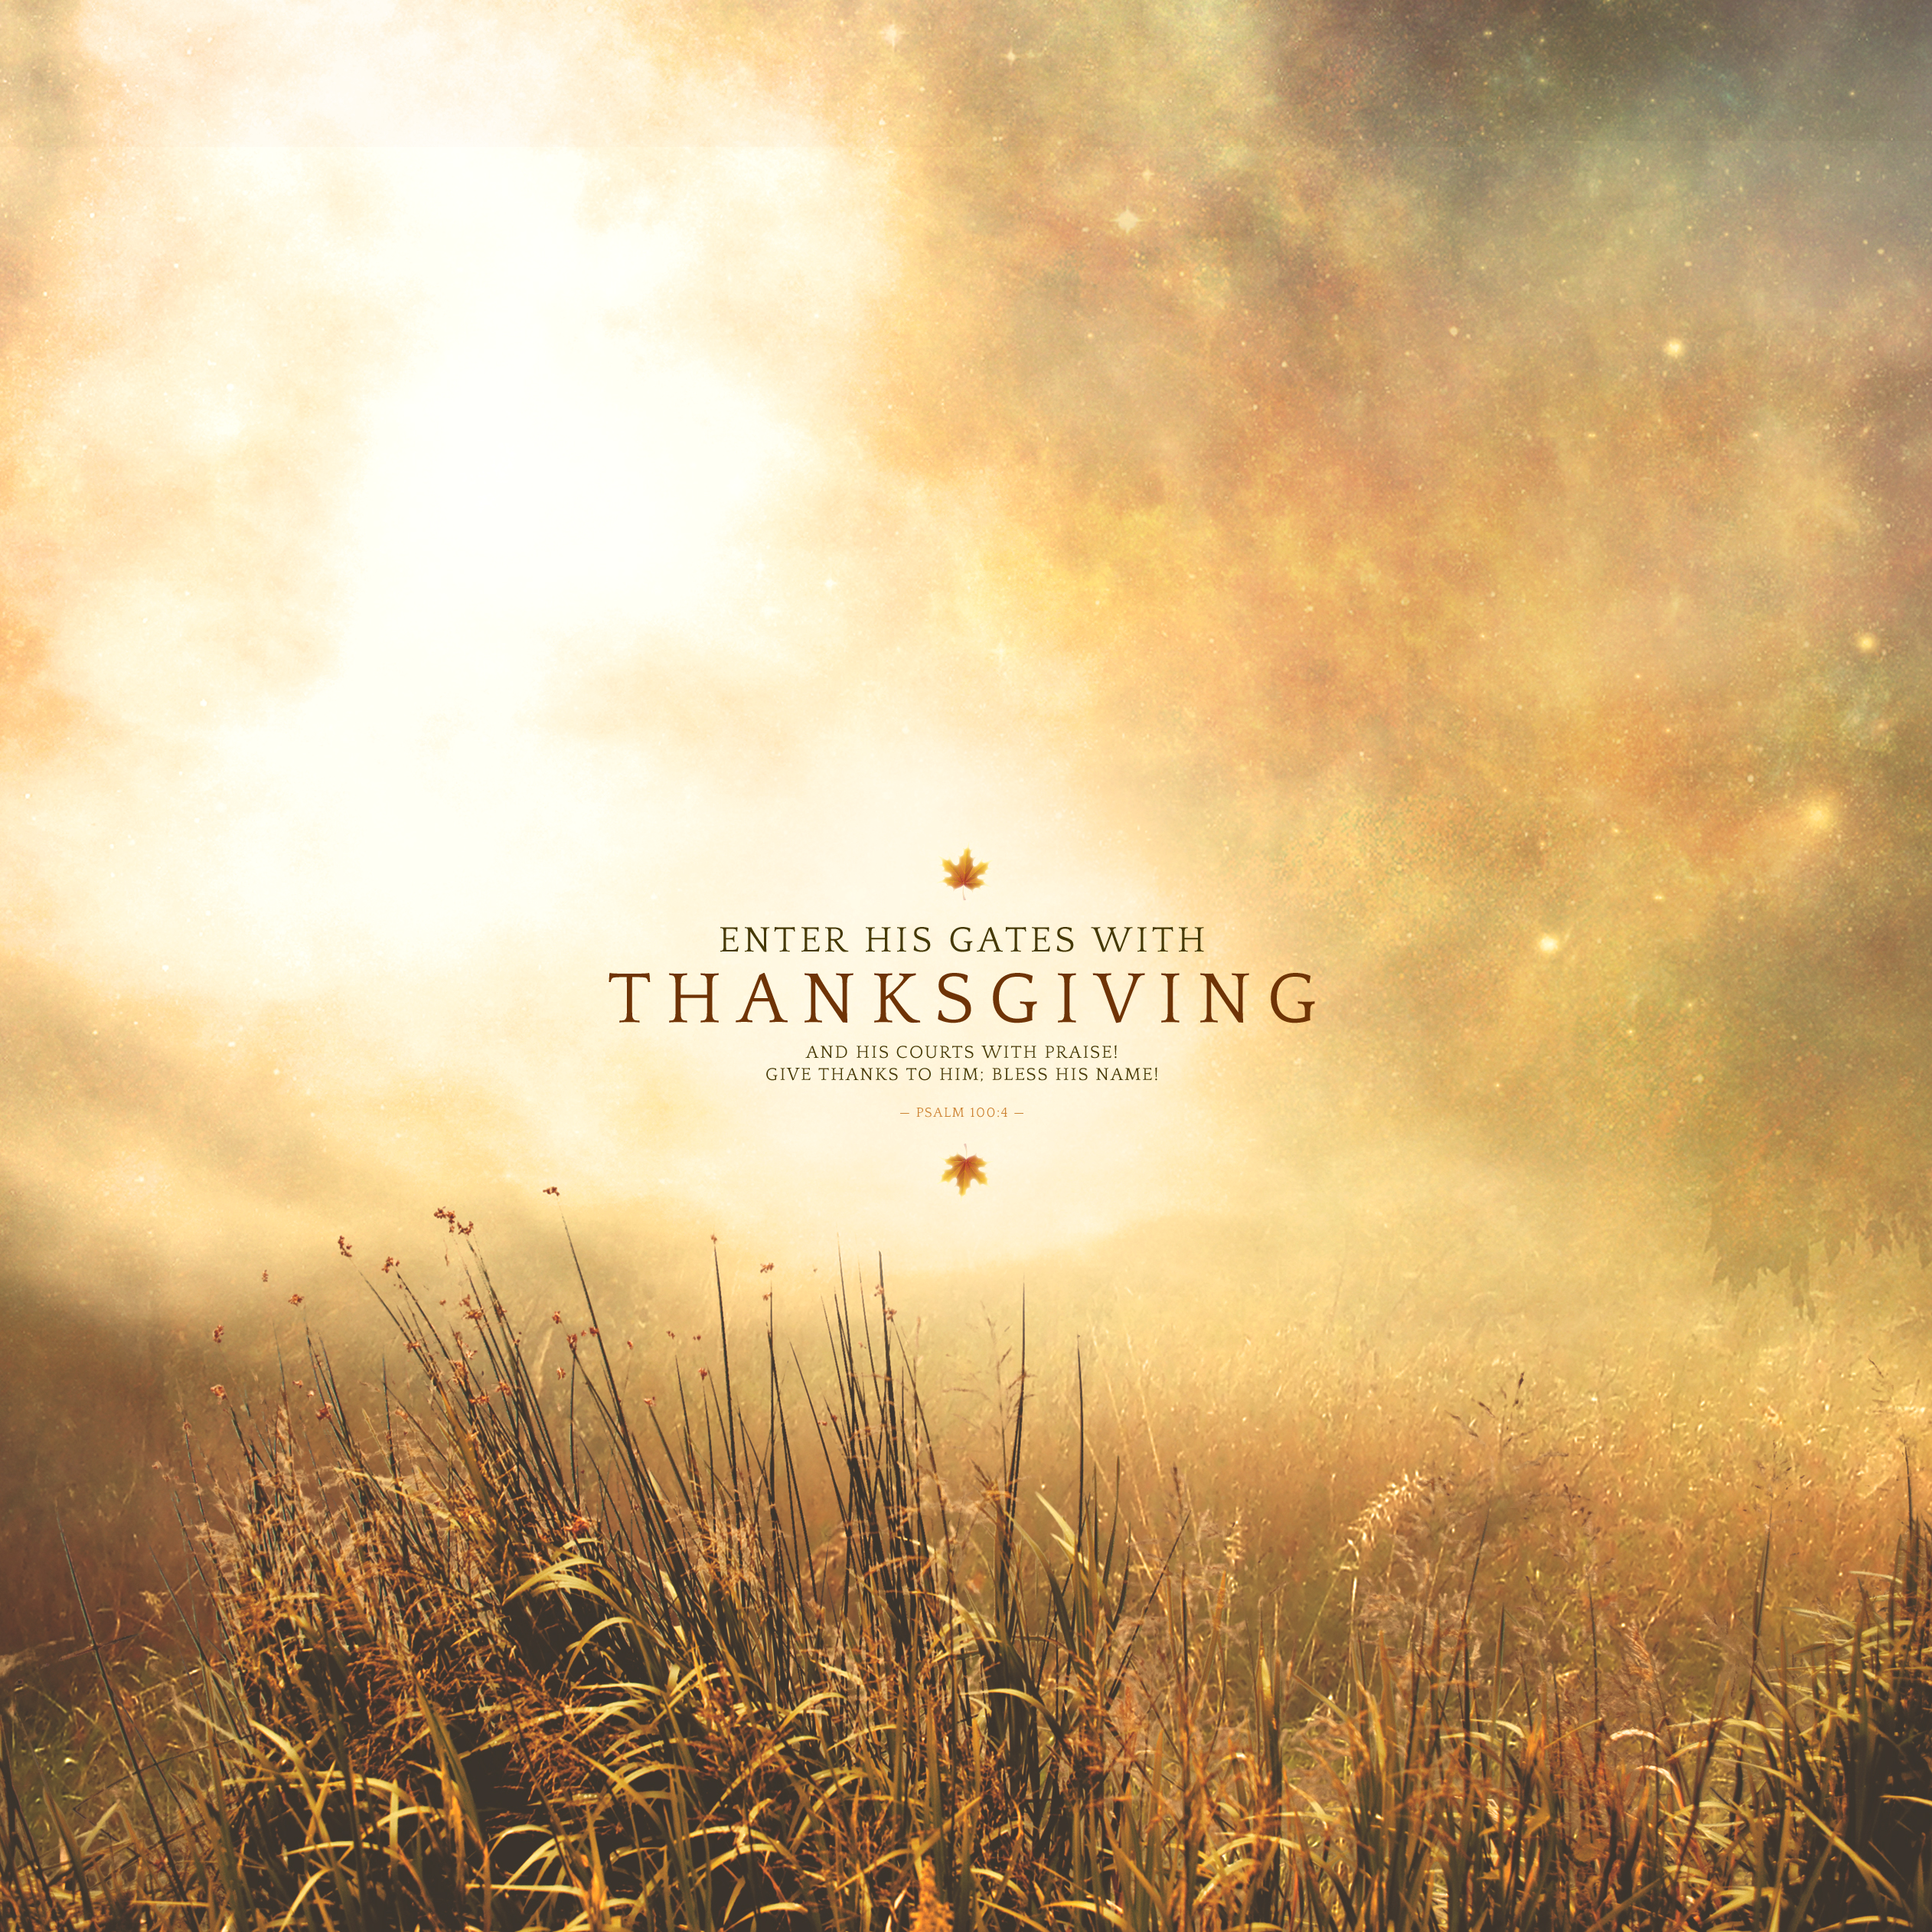 Wednesday Wallpaper: Enter His Gates with Thanksgiving